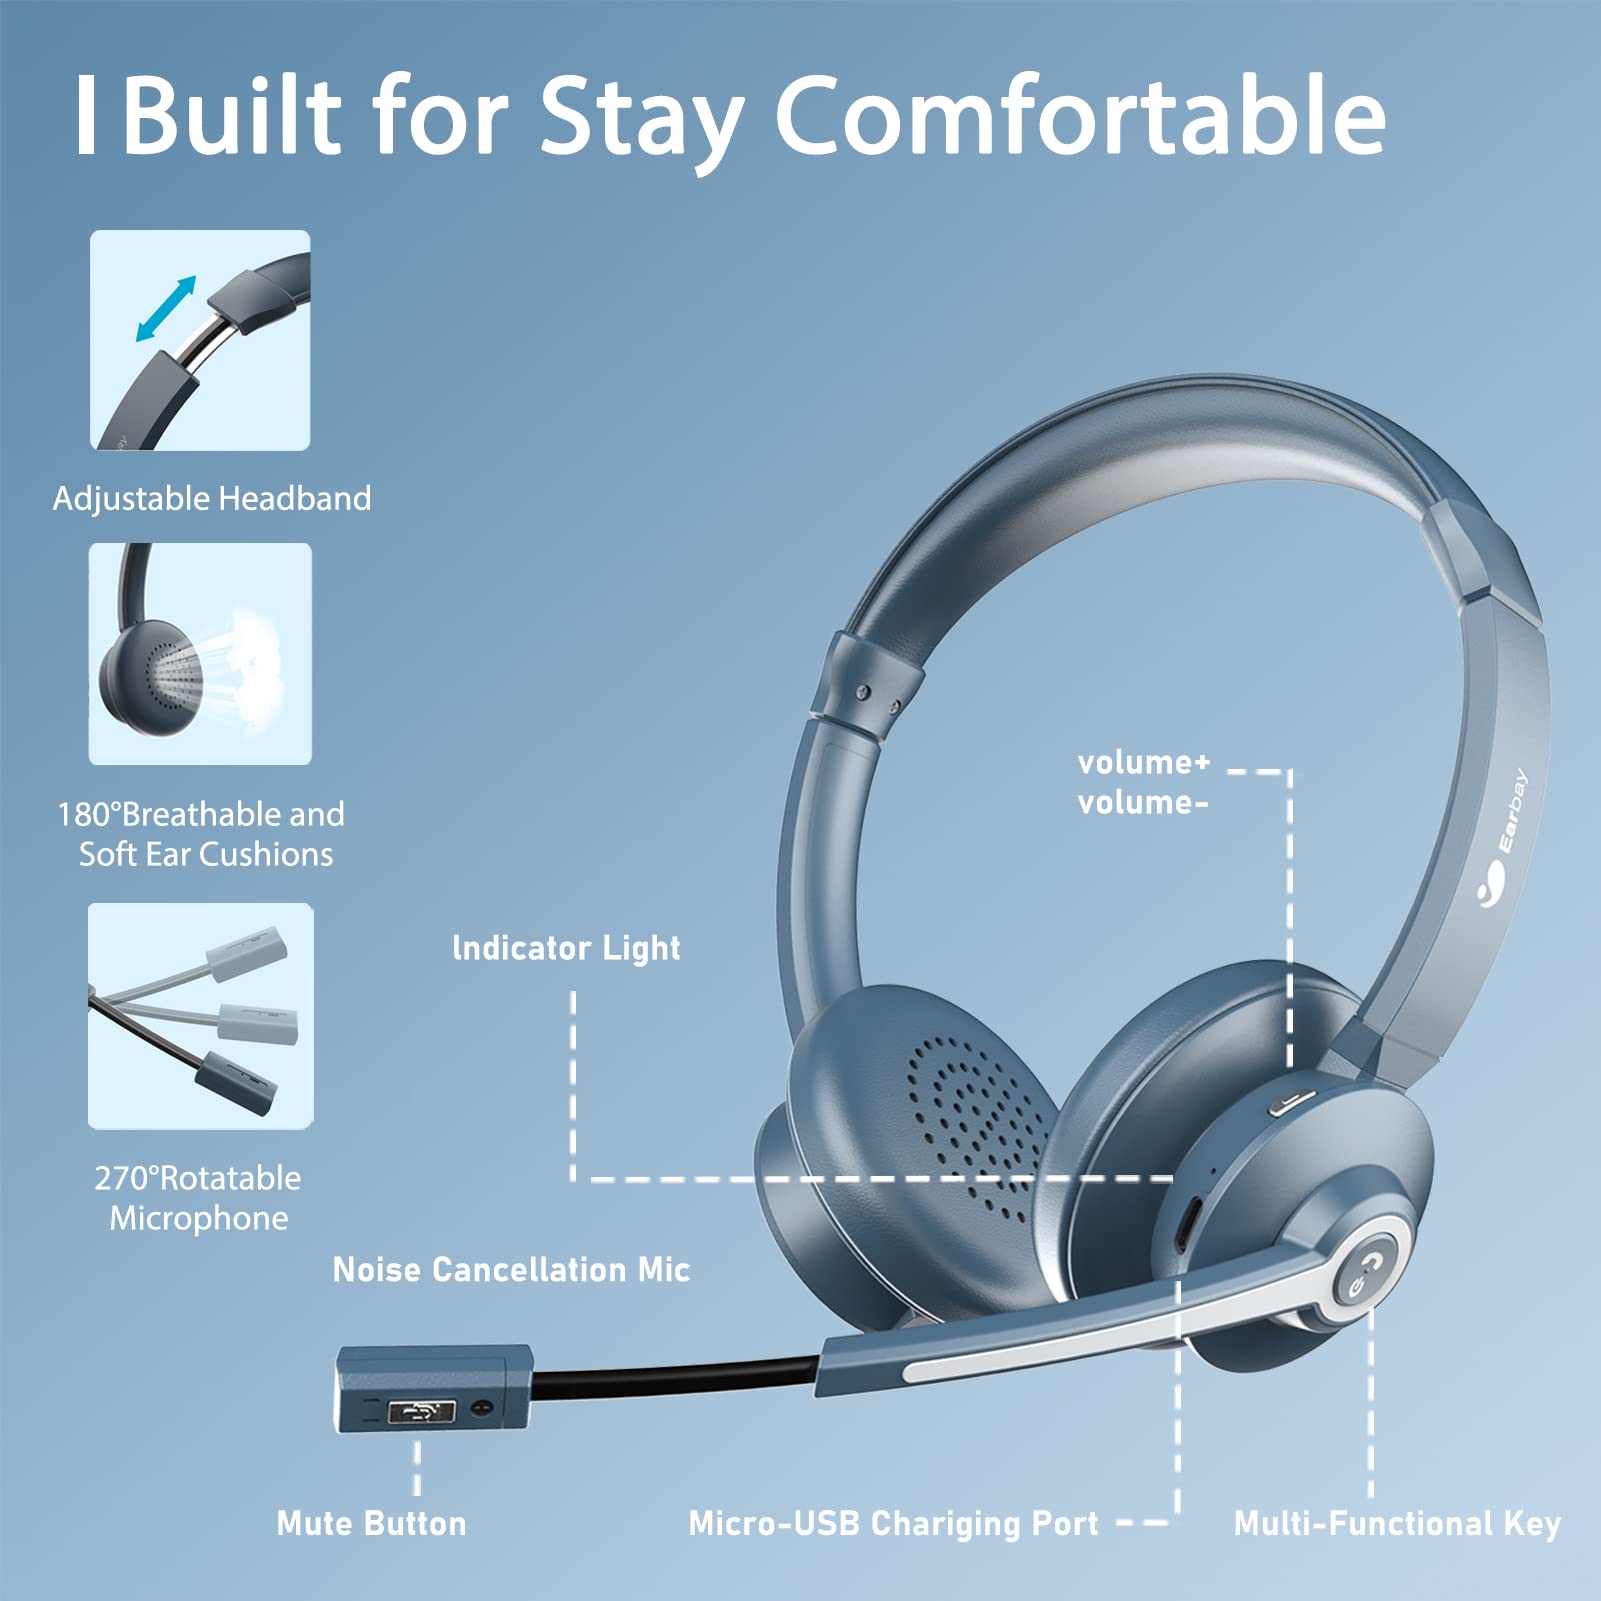 Built for stay comfortable,adjustable headband,180° breathable and soft ear cushions,270° rotatable microphone,Mute button,Noise cancellation mic, Micro-USB chariging prot,Multi-Functional key,Lndicator light.